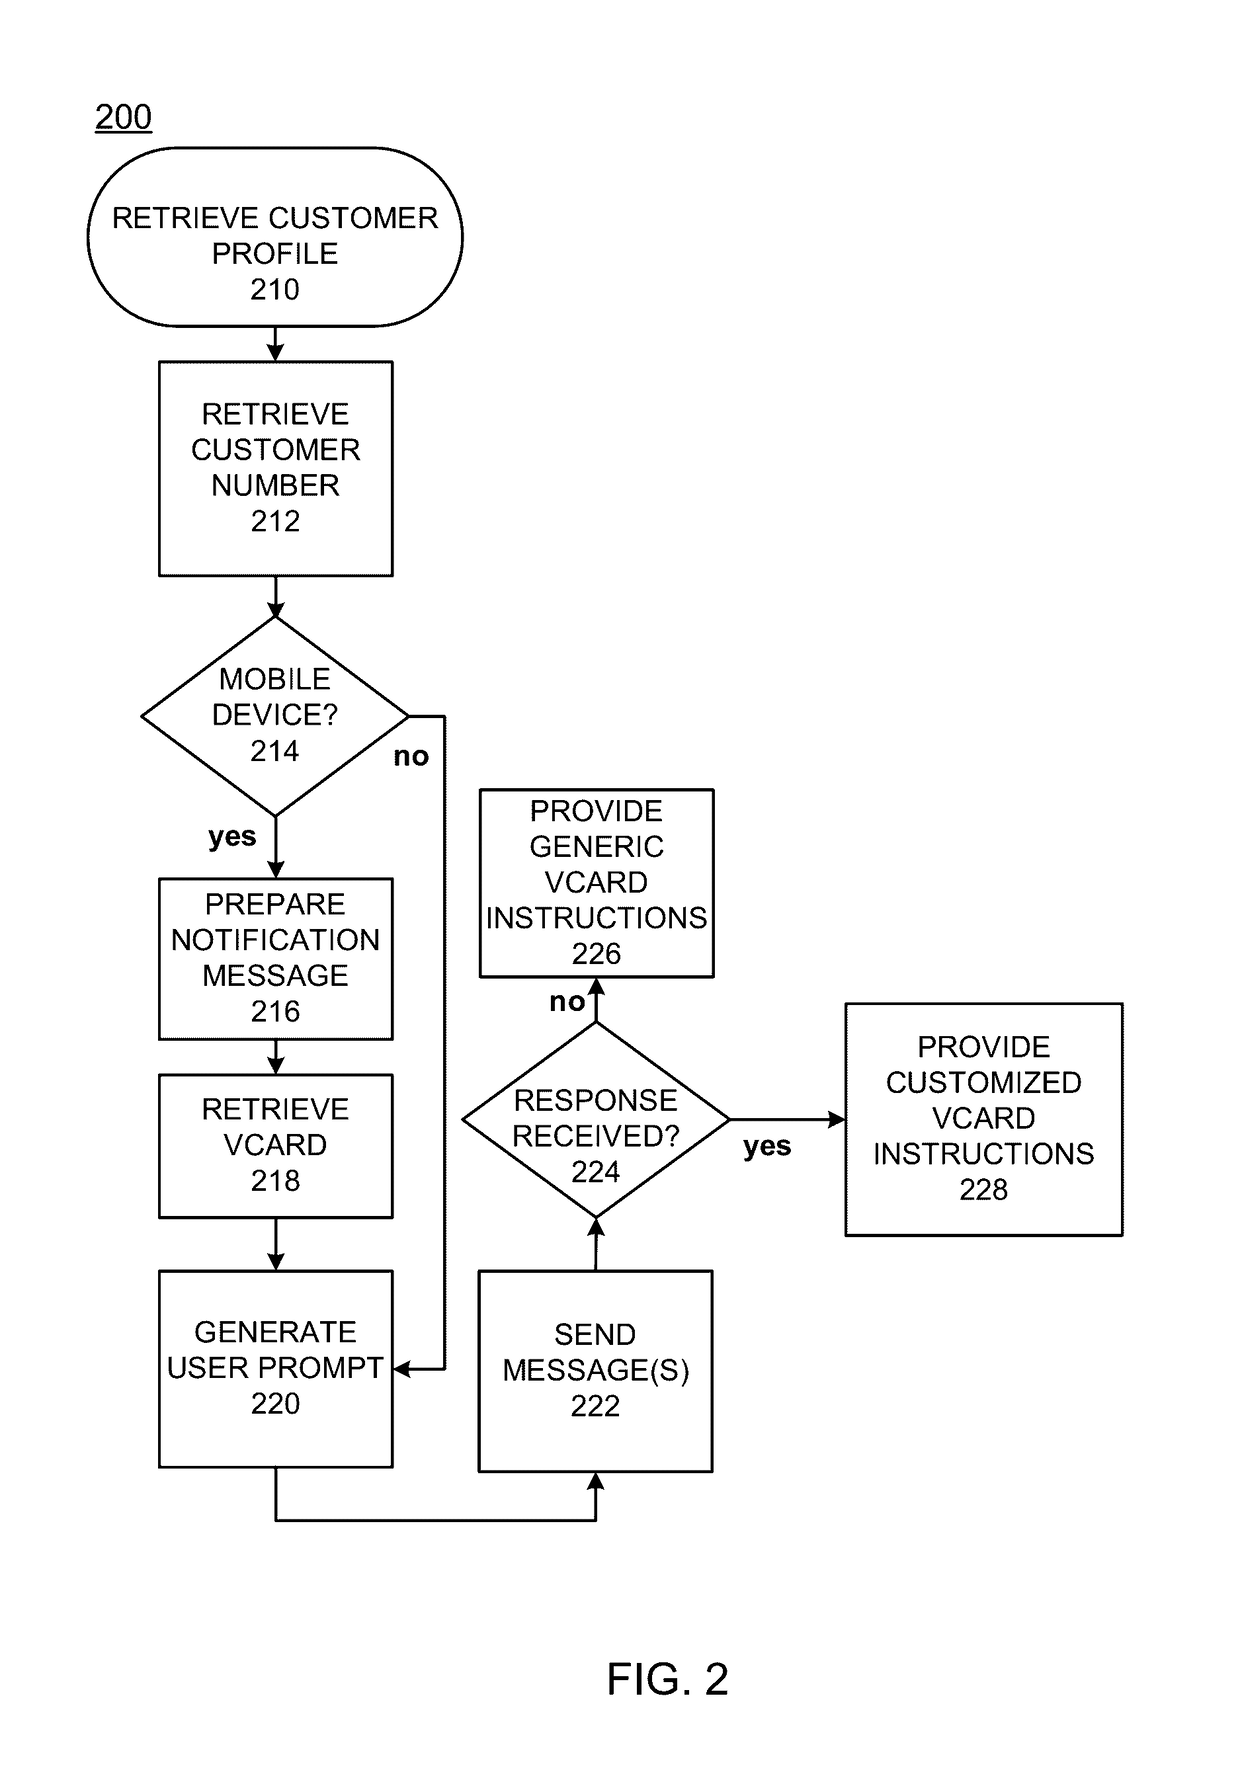 Electronic card delivery and communication channel integration